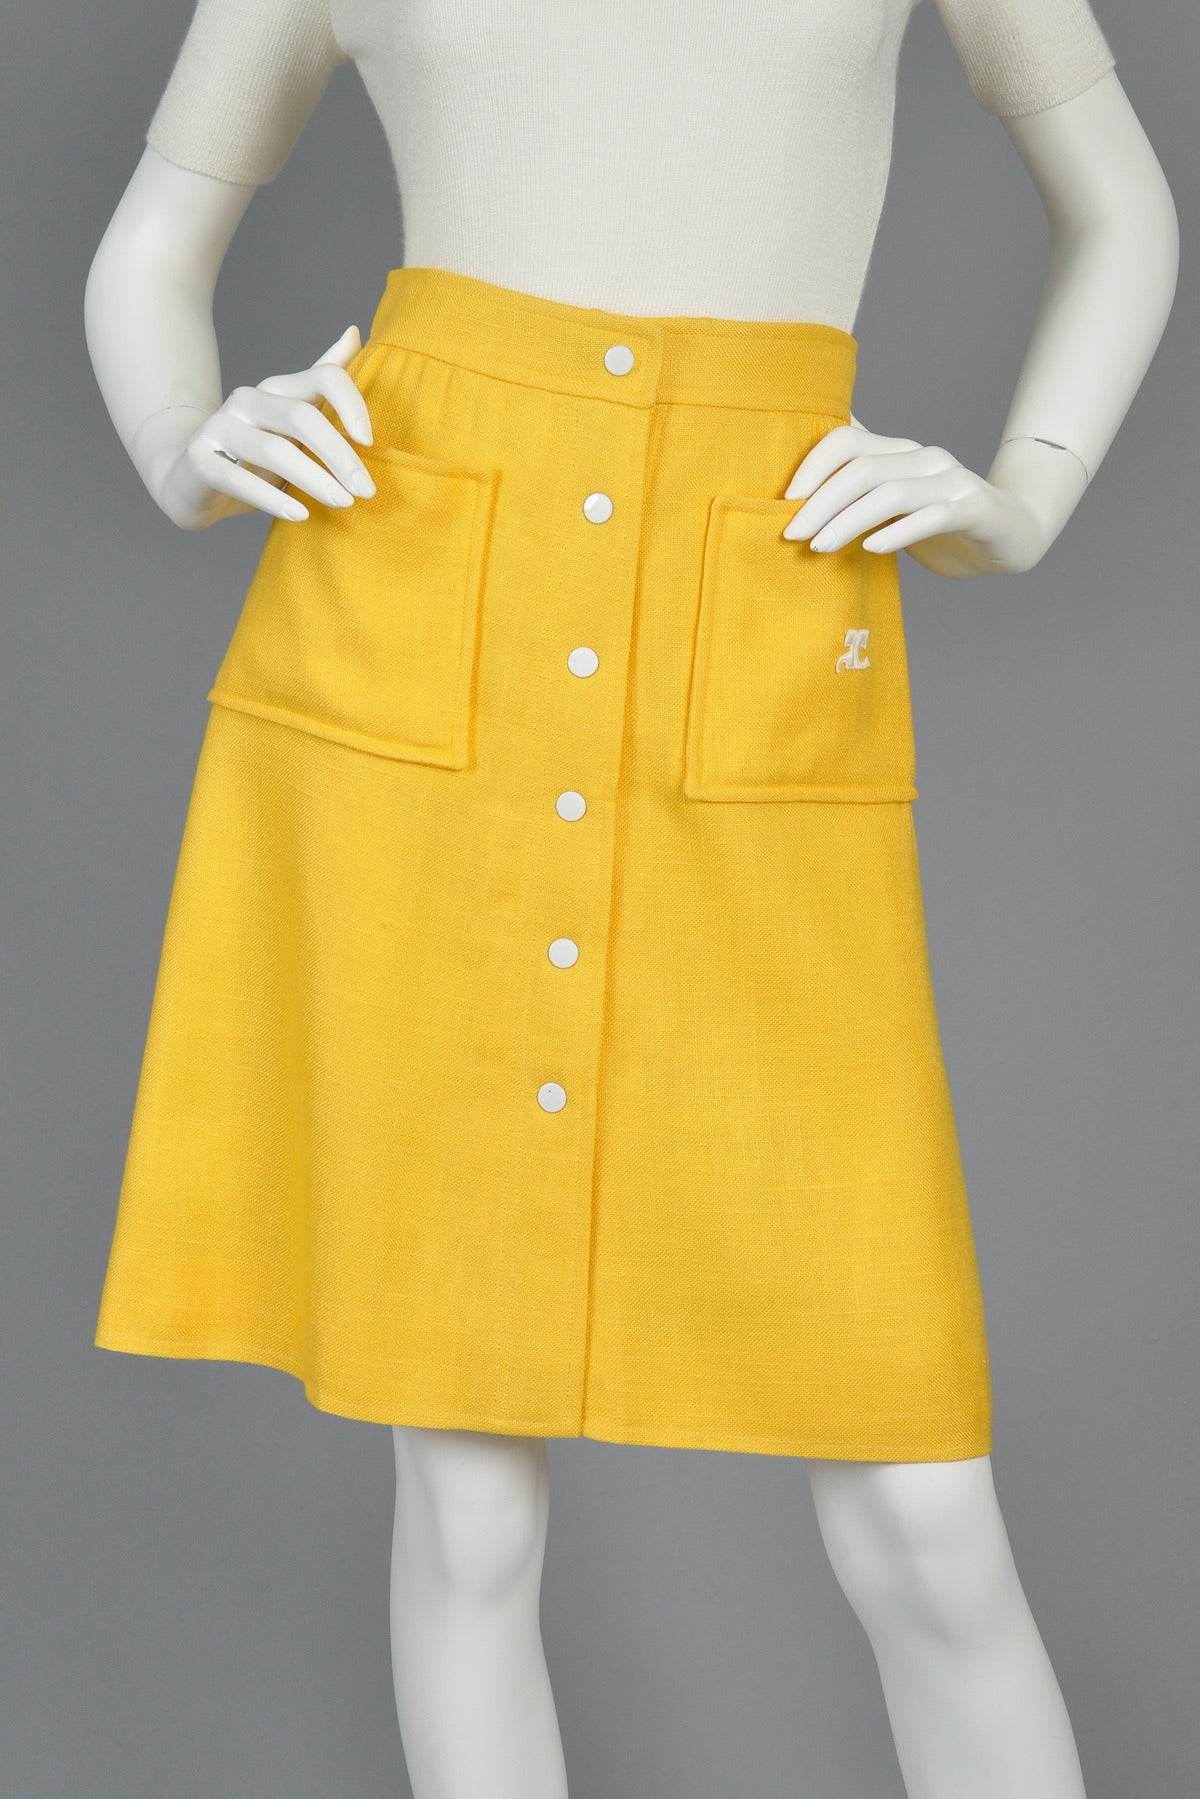 1960s Courrèges Numbered Snap-Front Yellow Skirt In Excellent Condition In Yucca Valley, CA